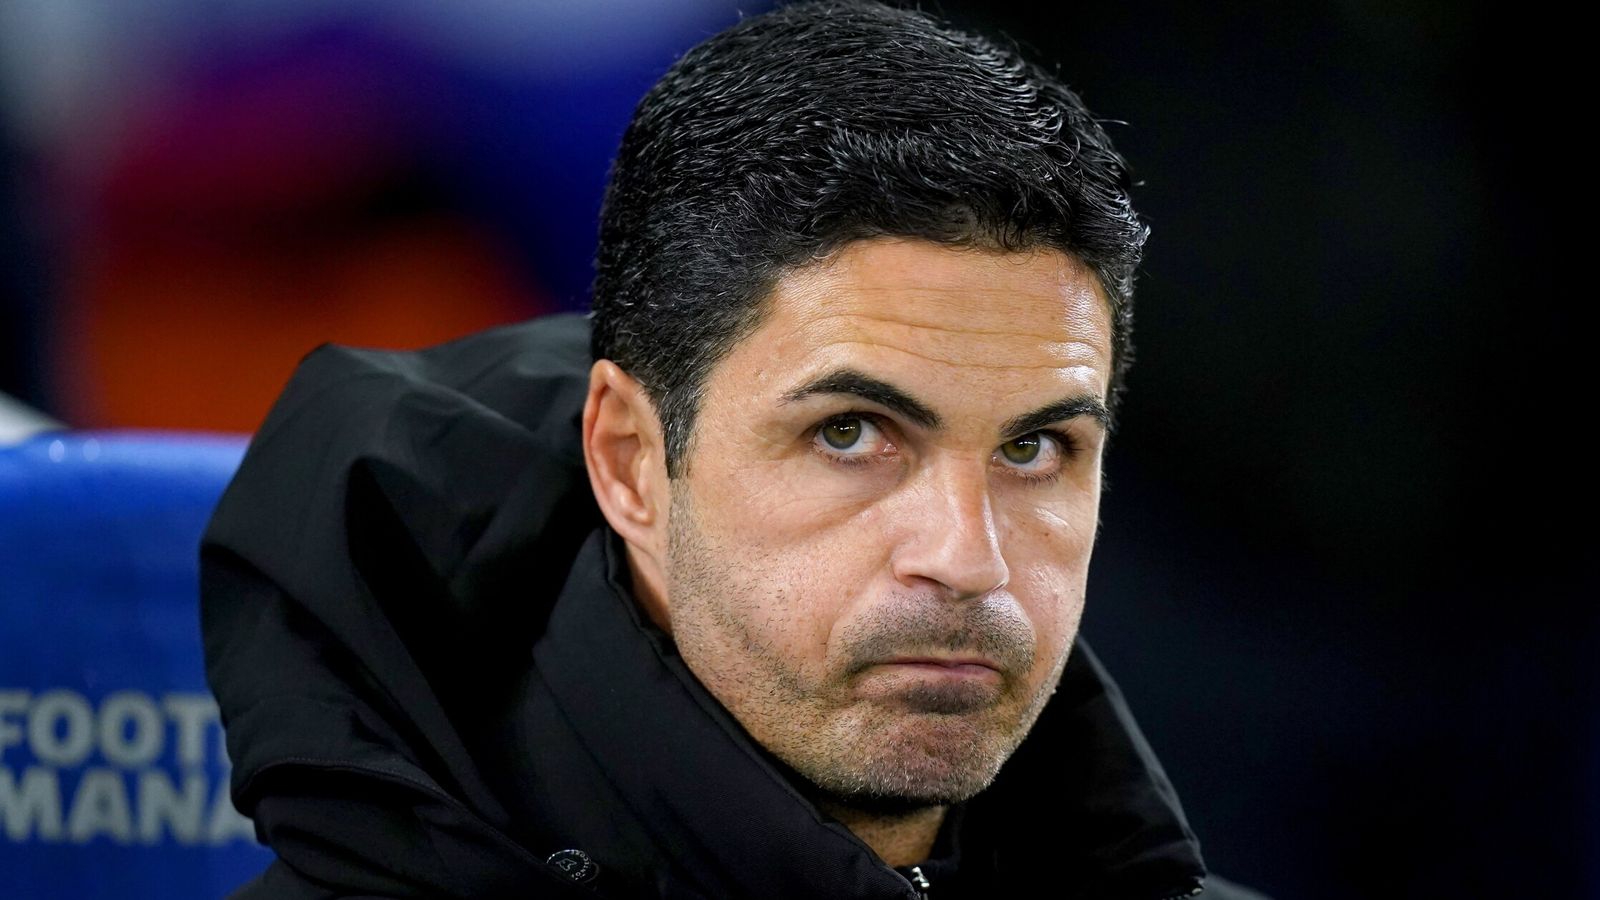 Mikel Arteta: Arsenal boss admits he questioned his future at the club after disappointing end to last season | Football News